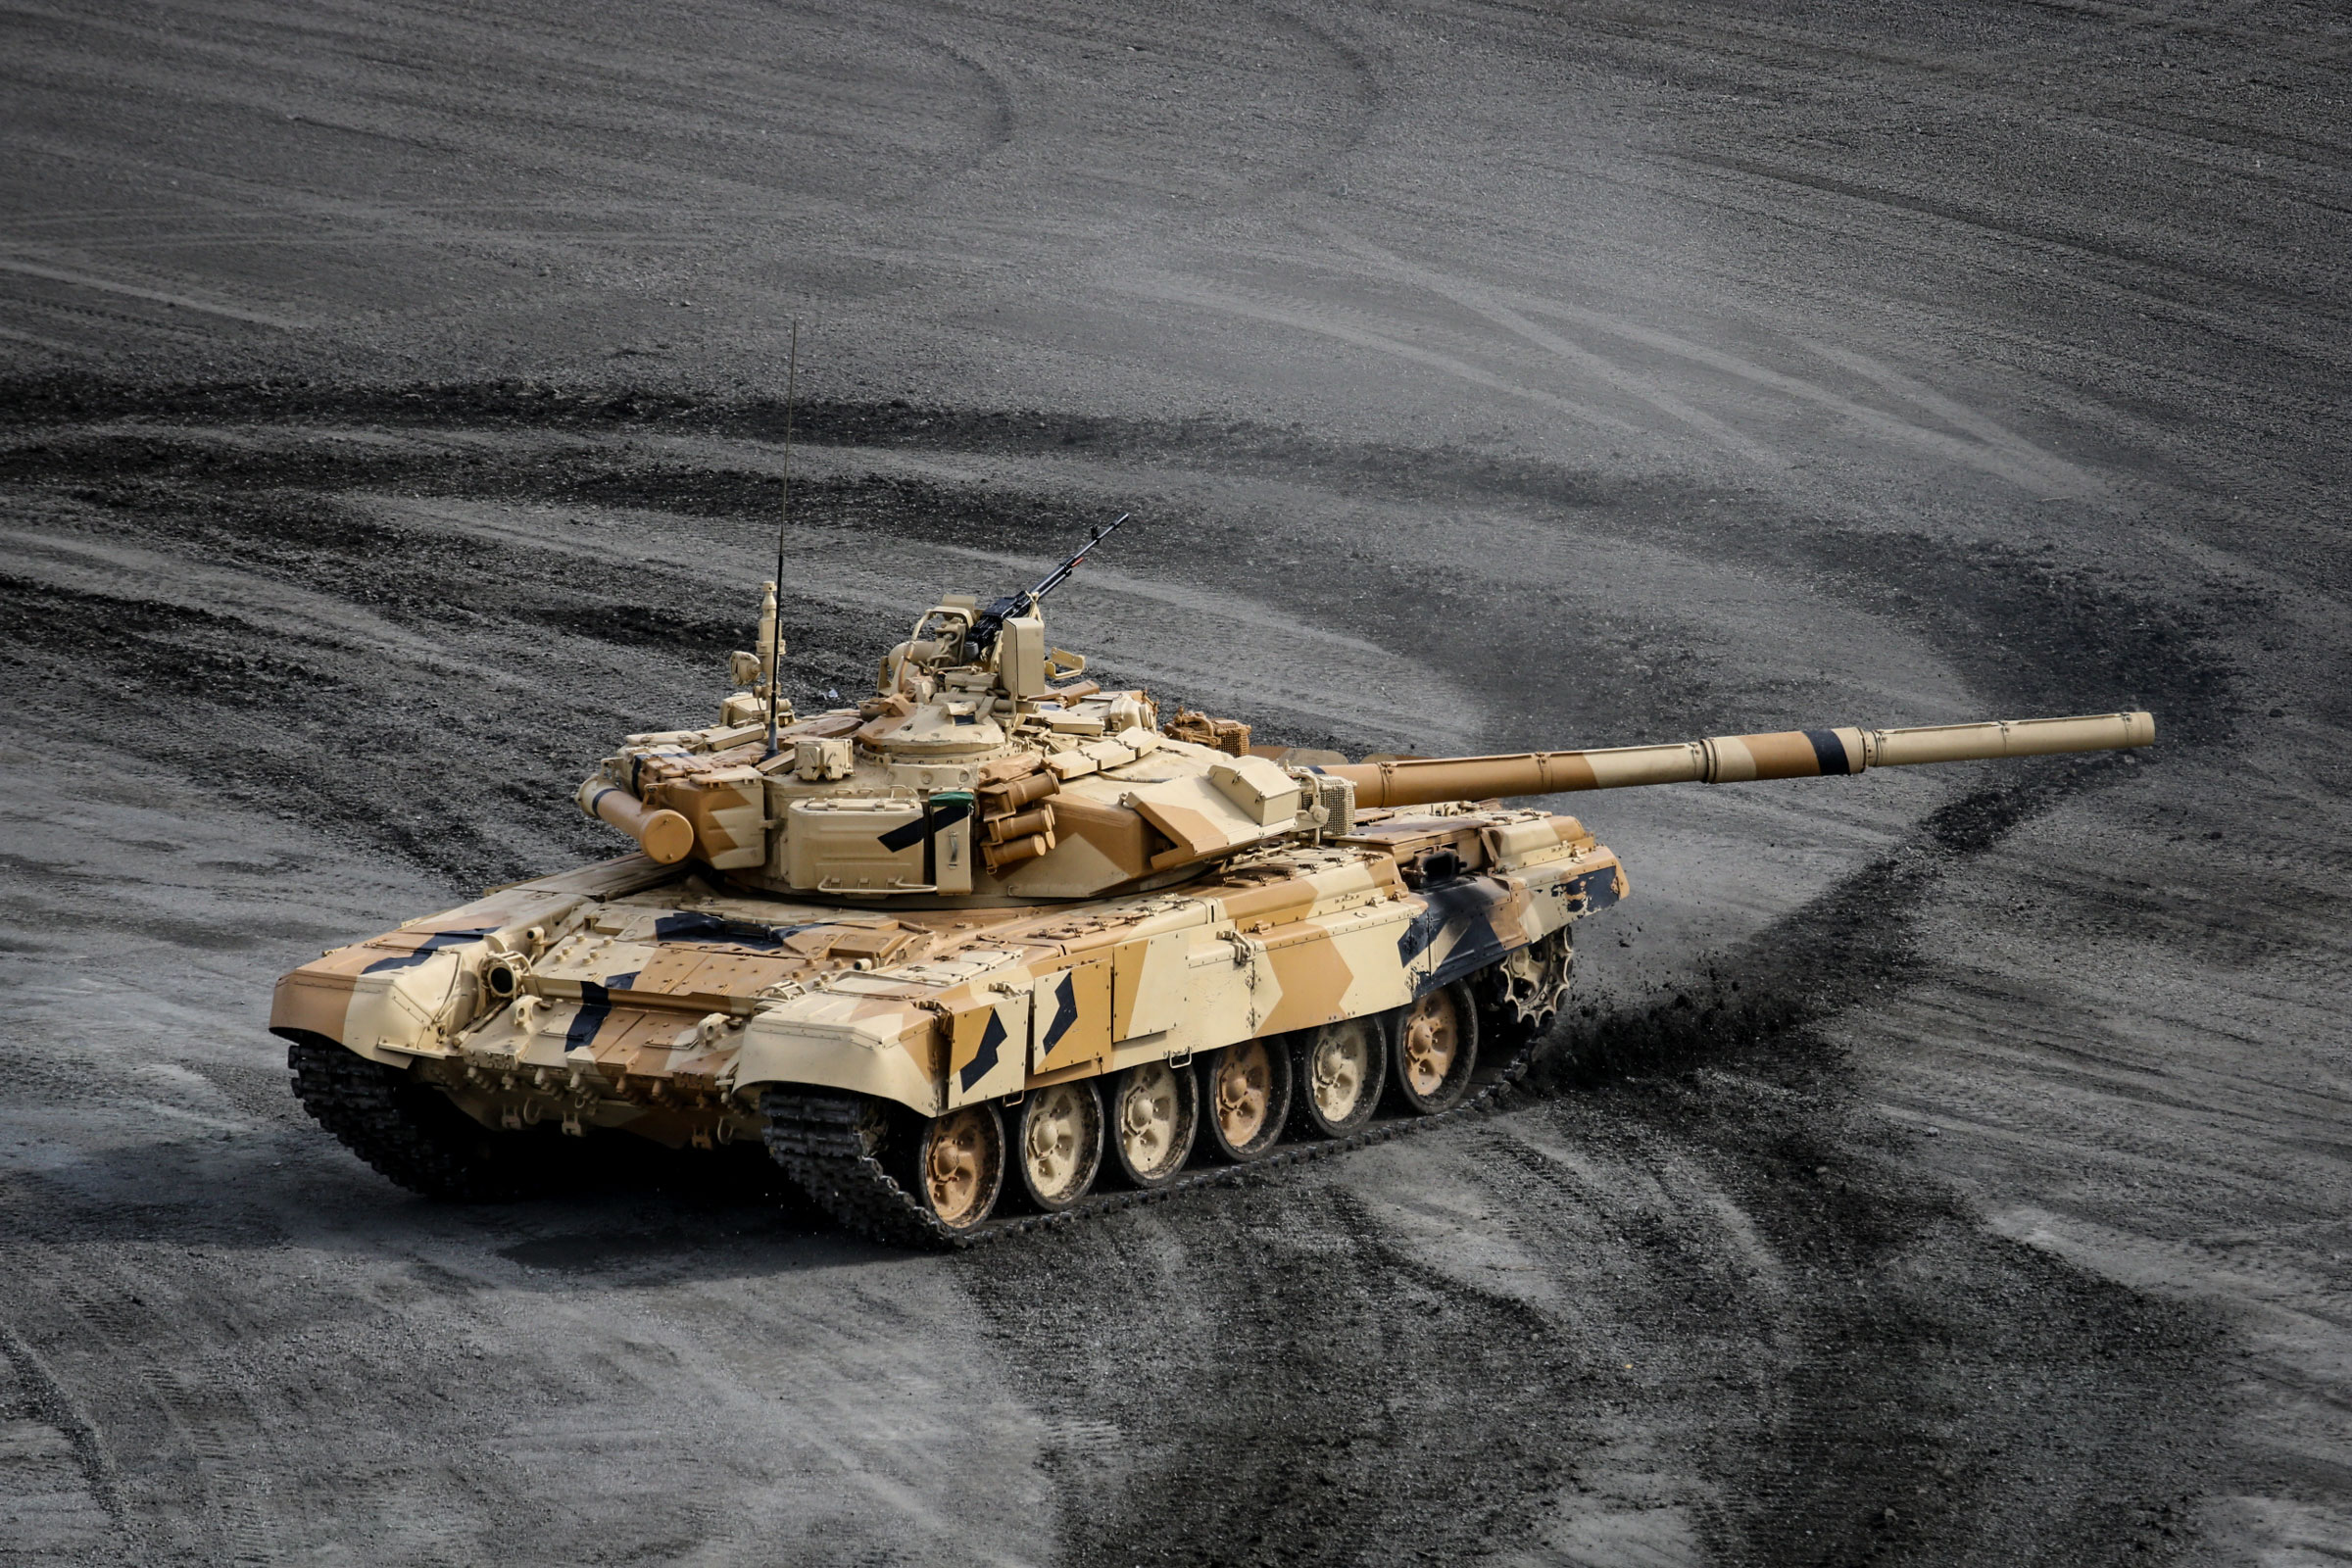 By 2020, India plans to induct more than 1,600 T-90 tanks.